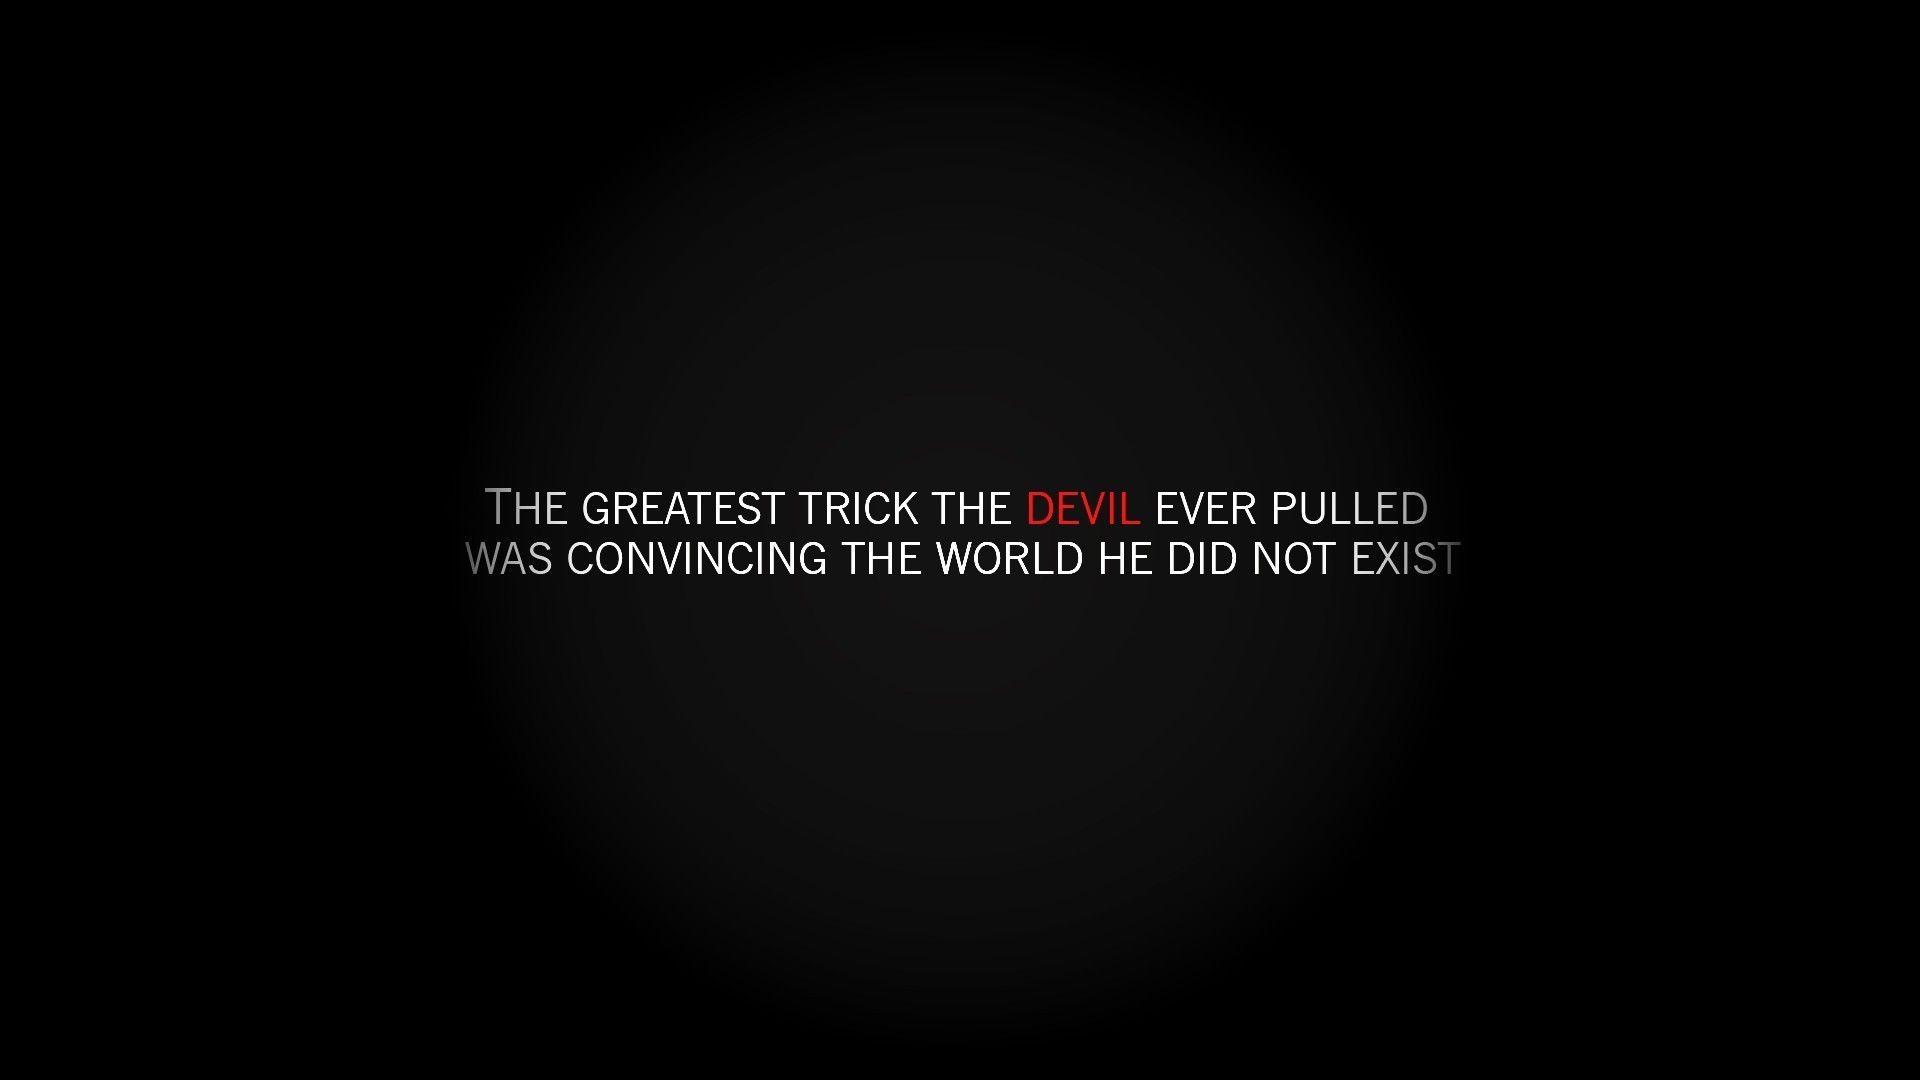 Devil quotes saying wallpaper. PC